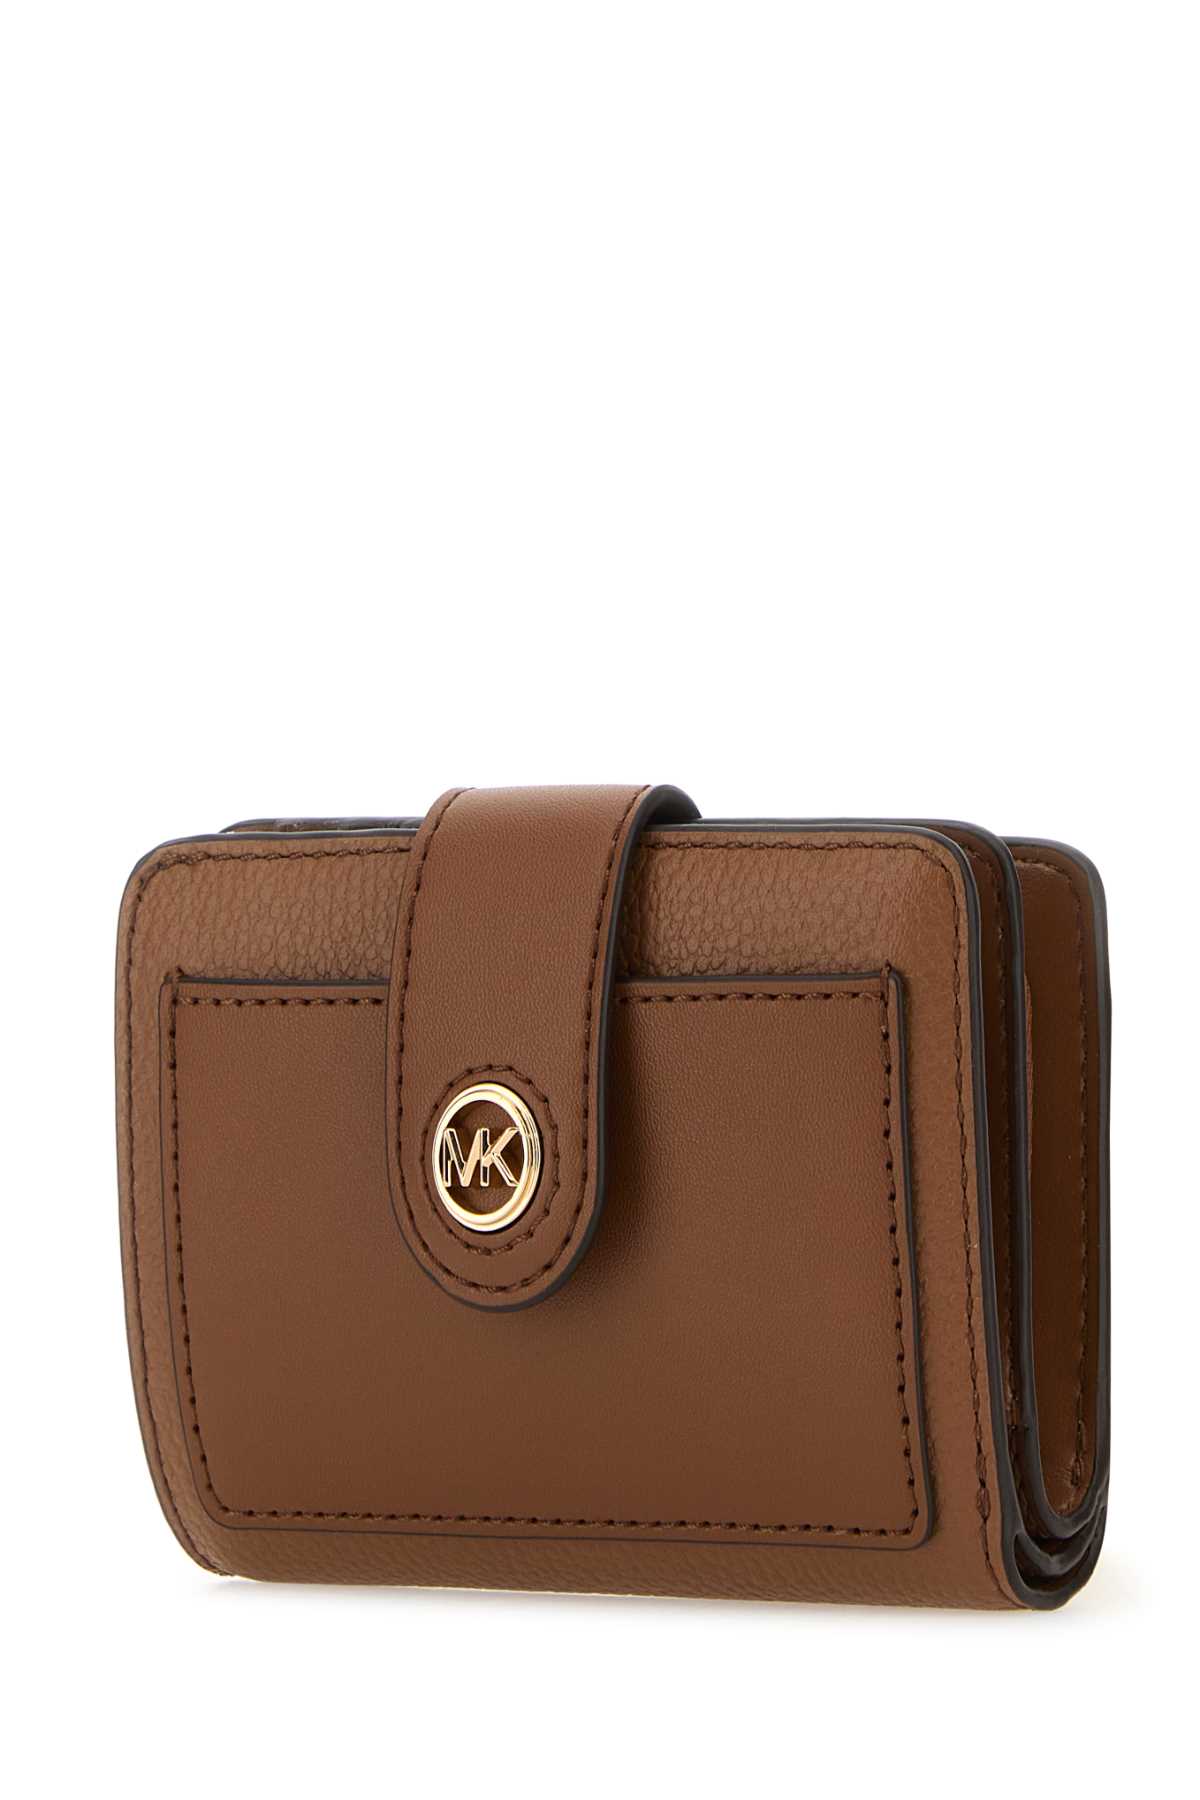 Michael Kors Camel Leather Wallet In Luggage